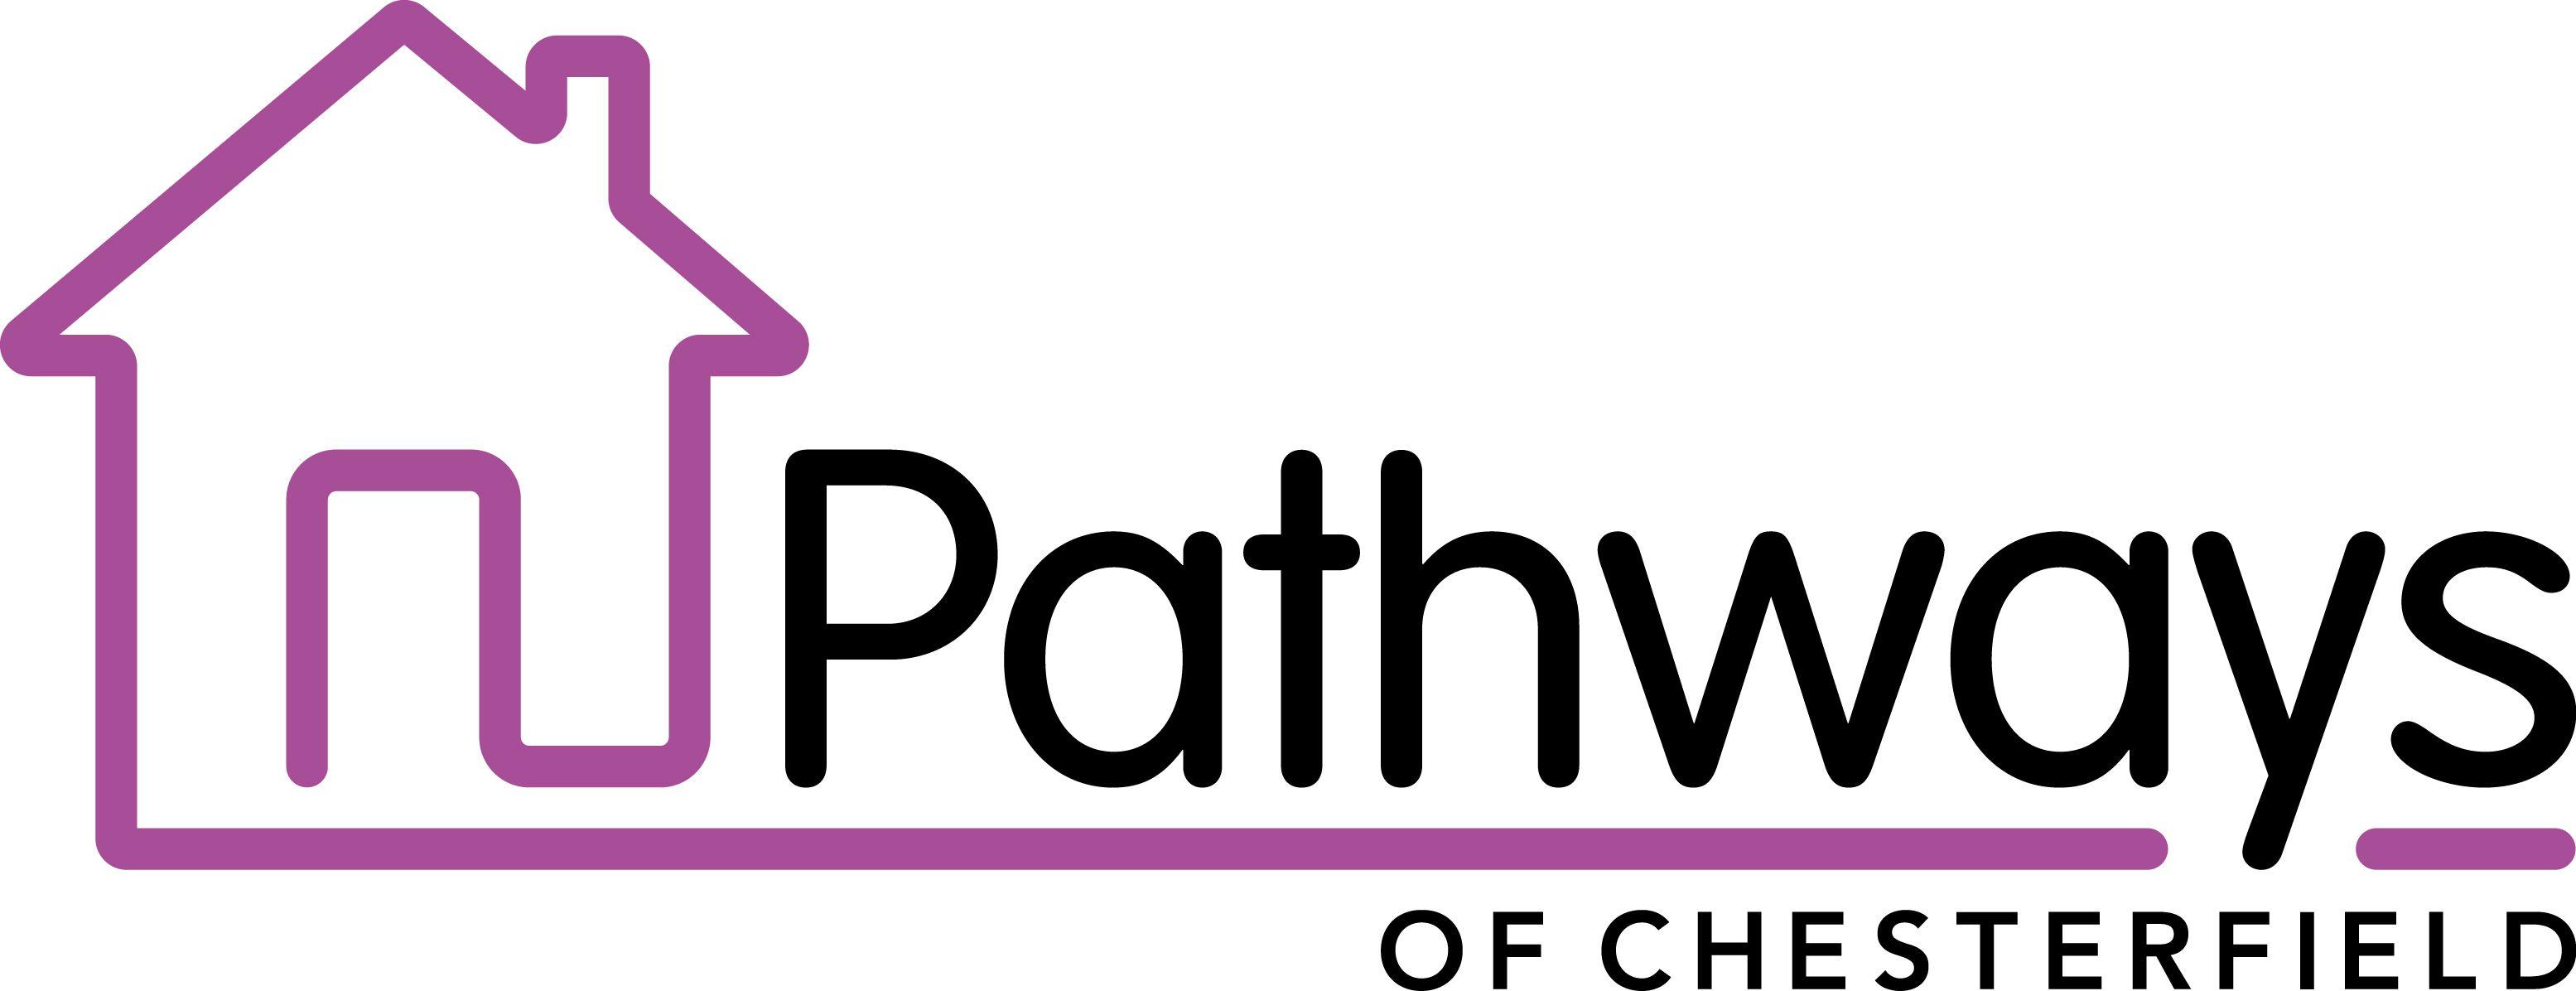 Chesterfield Logo - Home. Pathways of Chesterfield